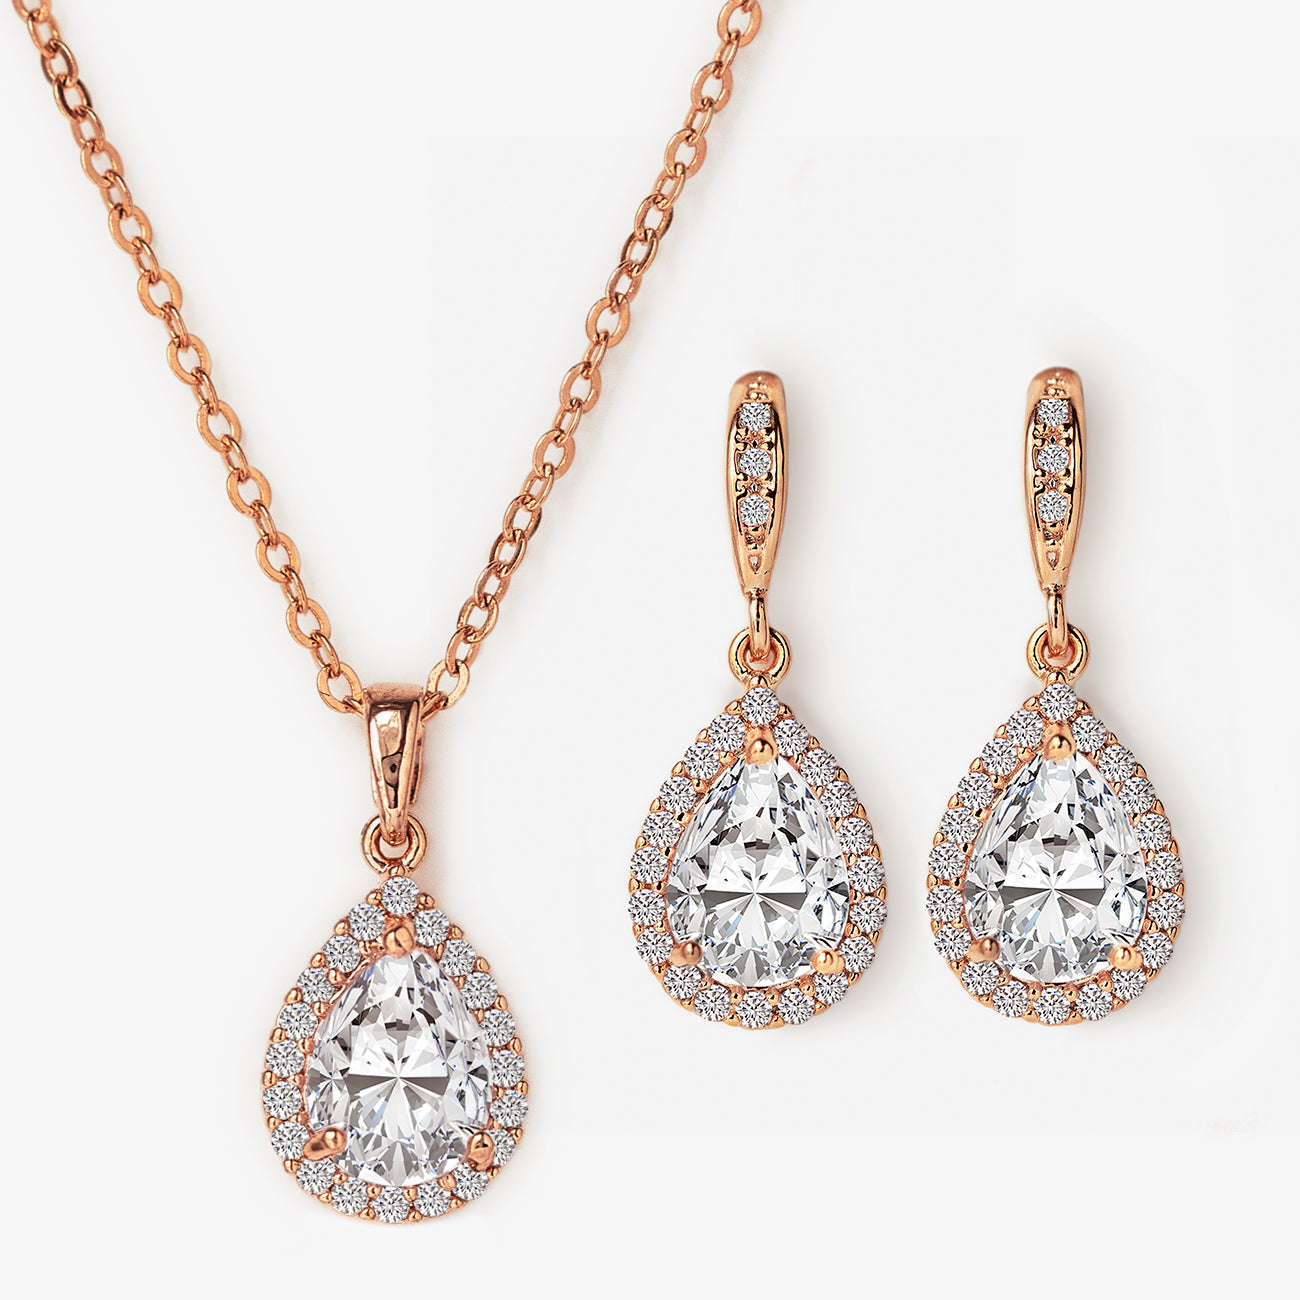 amazon.com Amazon.com: NLCAC Rose Gold Teardrop Crystal Earrings Dangle  Long Rhinestone Chandelier Earring Wedding Jewelry for Bride Mother's Day  Gift Jewelry: Clothing, Shoes & Jewelry | ShopLook